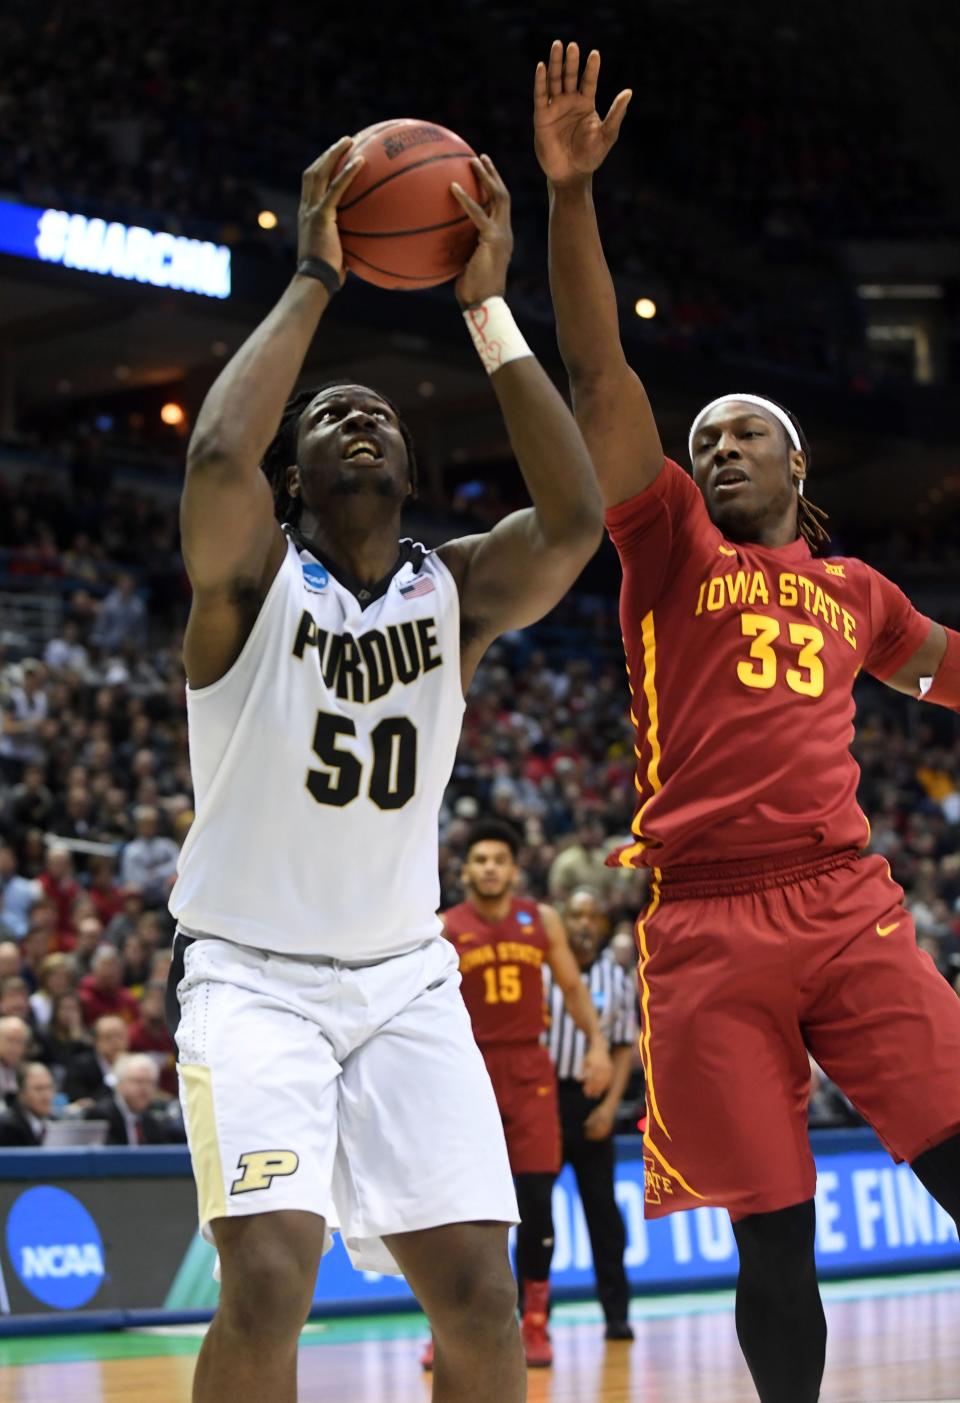 Purdue Boilermakers forward Caleb Swanigan (50) goes up for a shot while Iowa State Cyclones forward Solomon Young (33) defends during the first half of the game in the second round of the 2017 NCAA Tournament at BMO Harris Bradley Center.